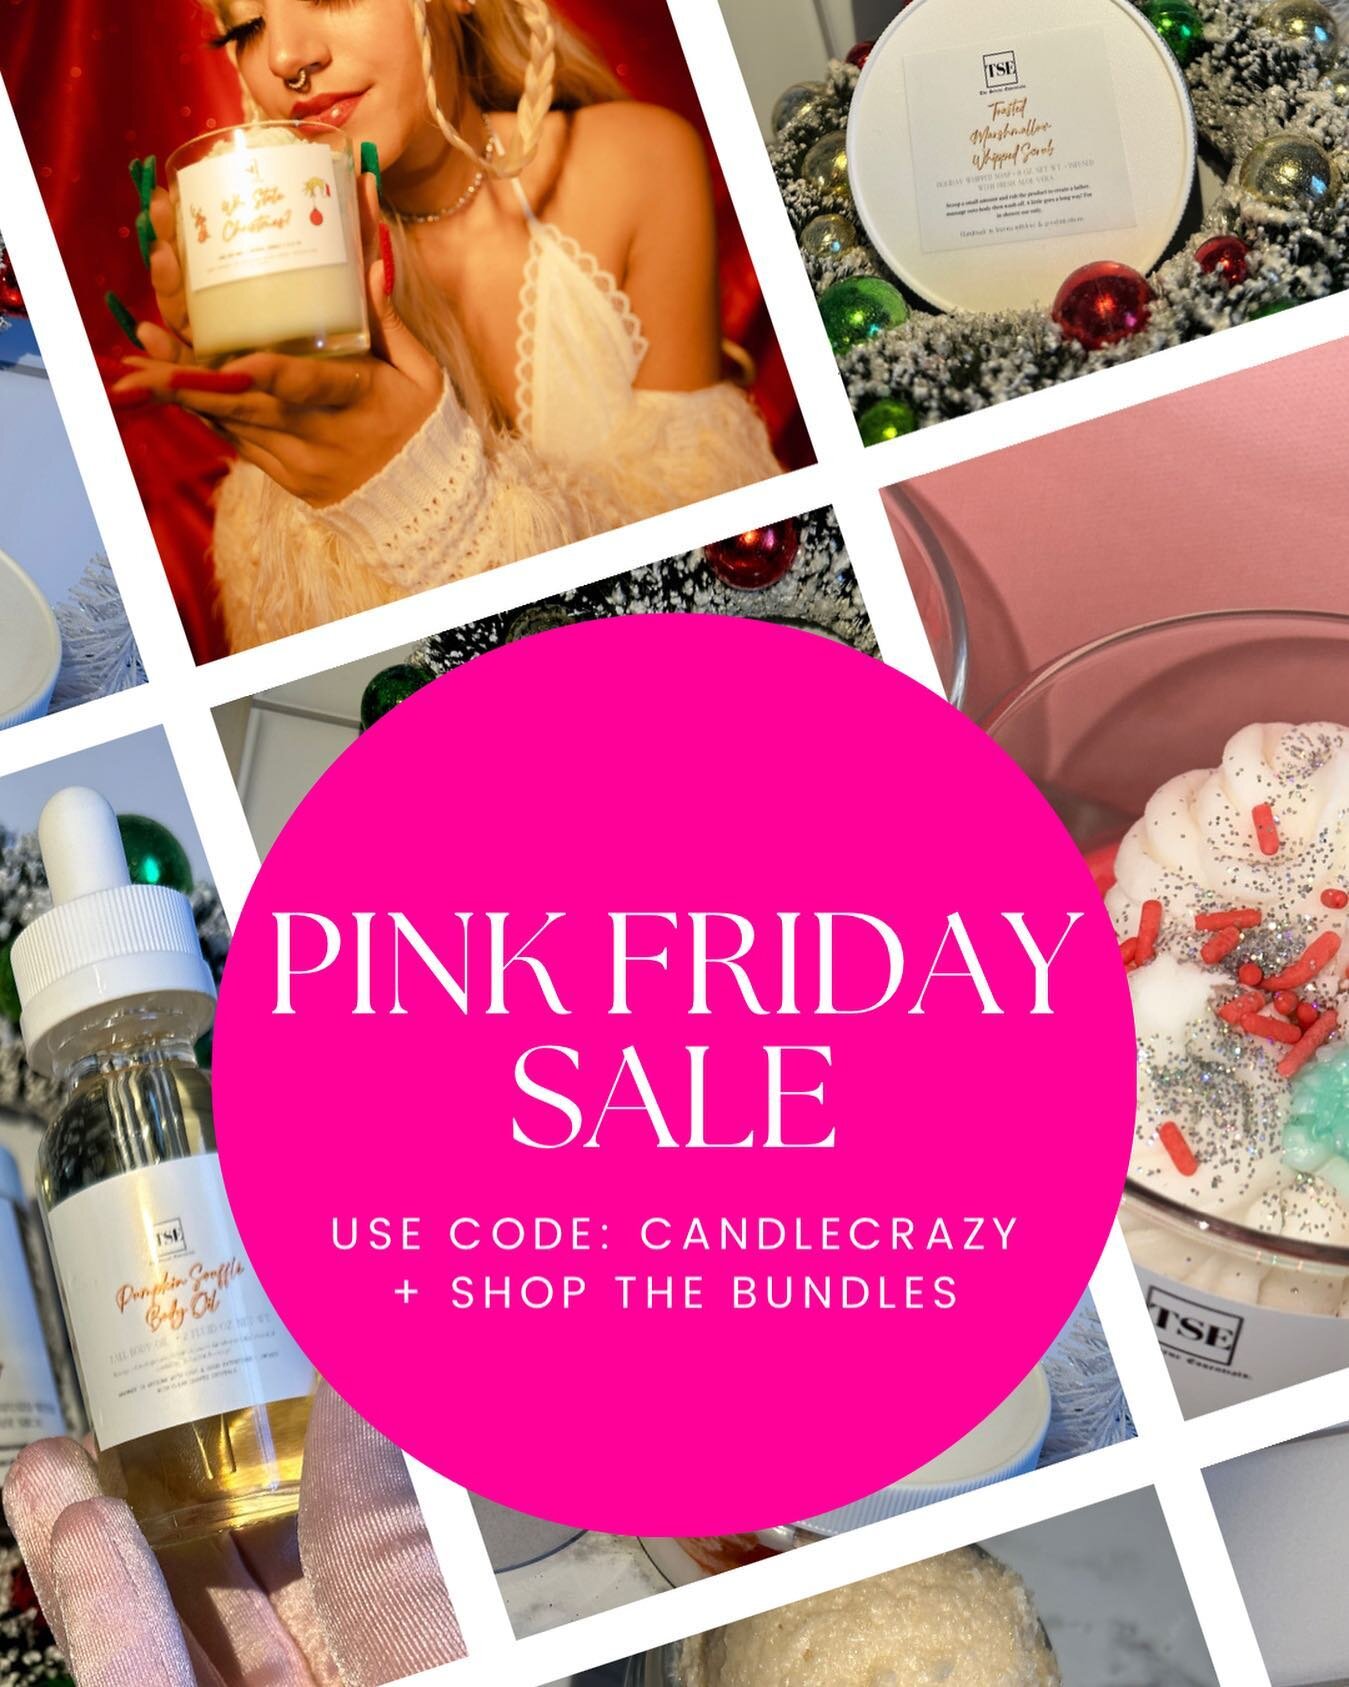 TODAY IS THE DAY! PINK FRIDAY 💗🌸 

Use code: CANDLECRAZY @ 7:55pm for 33% off all candles! 🥹✨ 

Shop skincare bundles, body butter bundles &amp; much more tonight 🤗💓 

See you later babes! 💓💓💓

&bull;
&bull;
&bull;
&bull;
&bull;
#blackfriday 